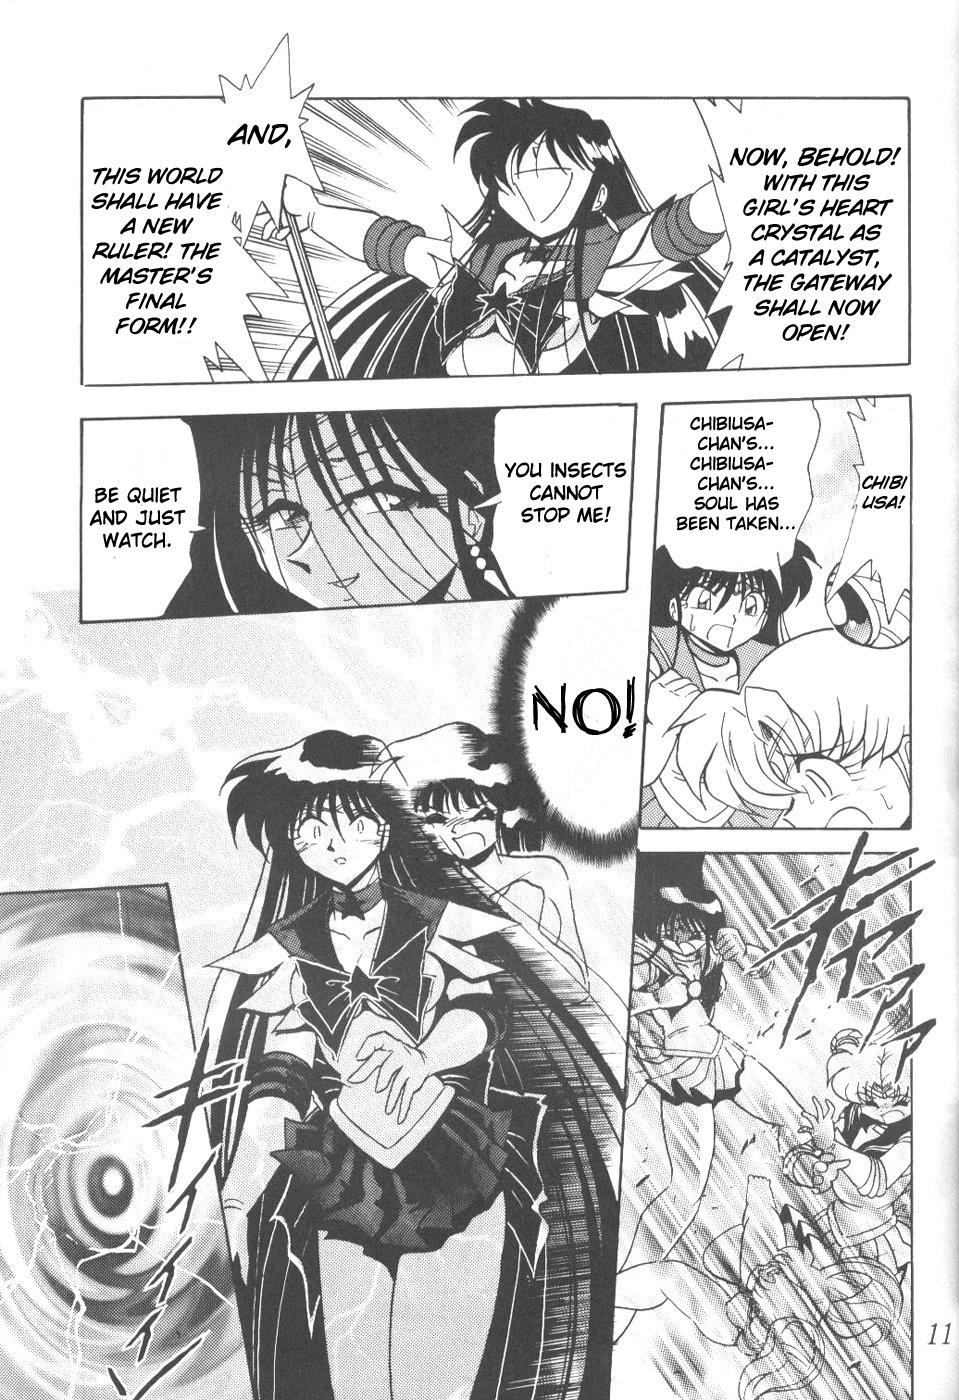 Whores Silent Saturn 8 - Sailor moon Gay Orgy - Page 8